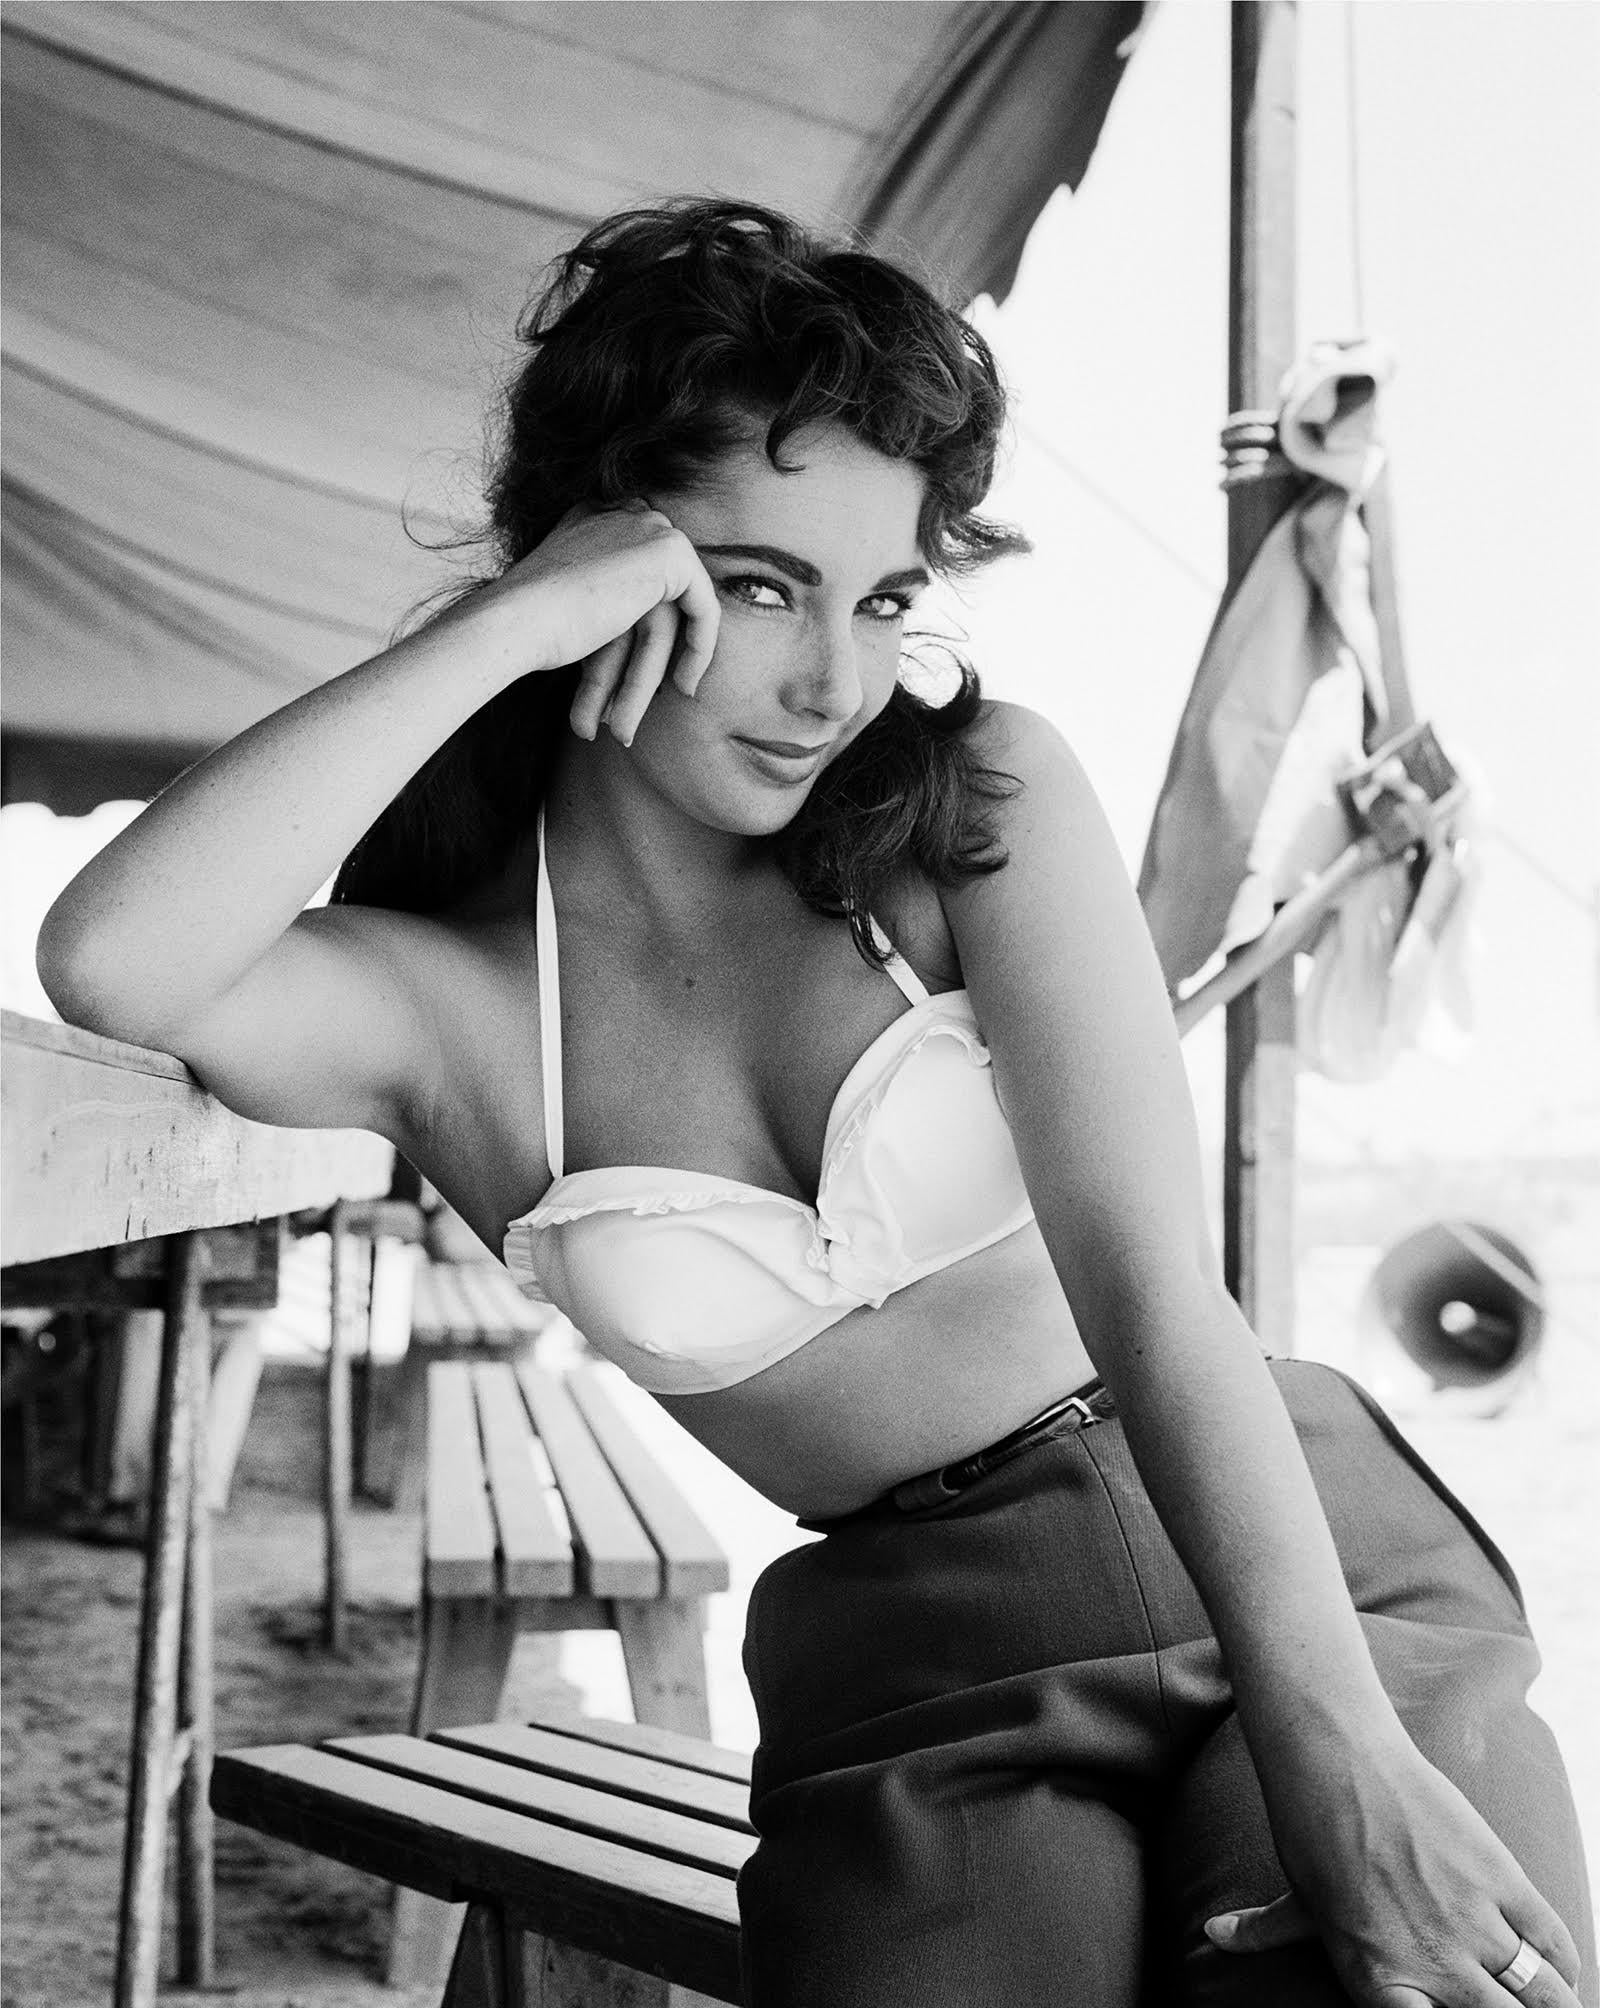 Frank Worth Black and White Photograph - Elizabeth Taylor on set of Giant